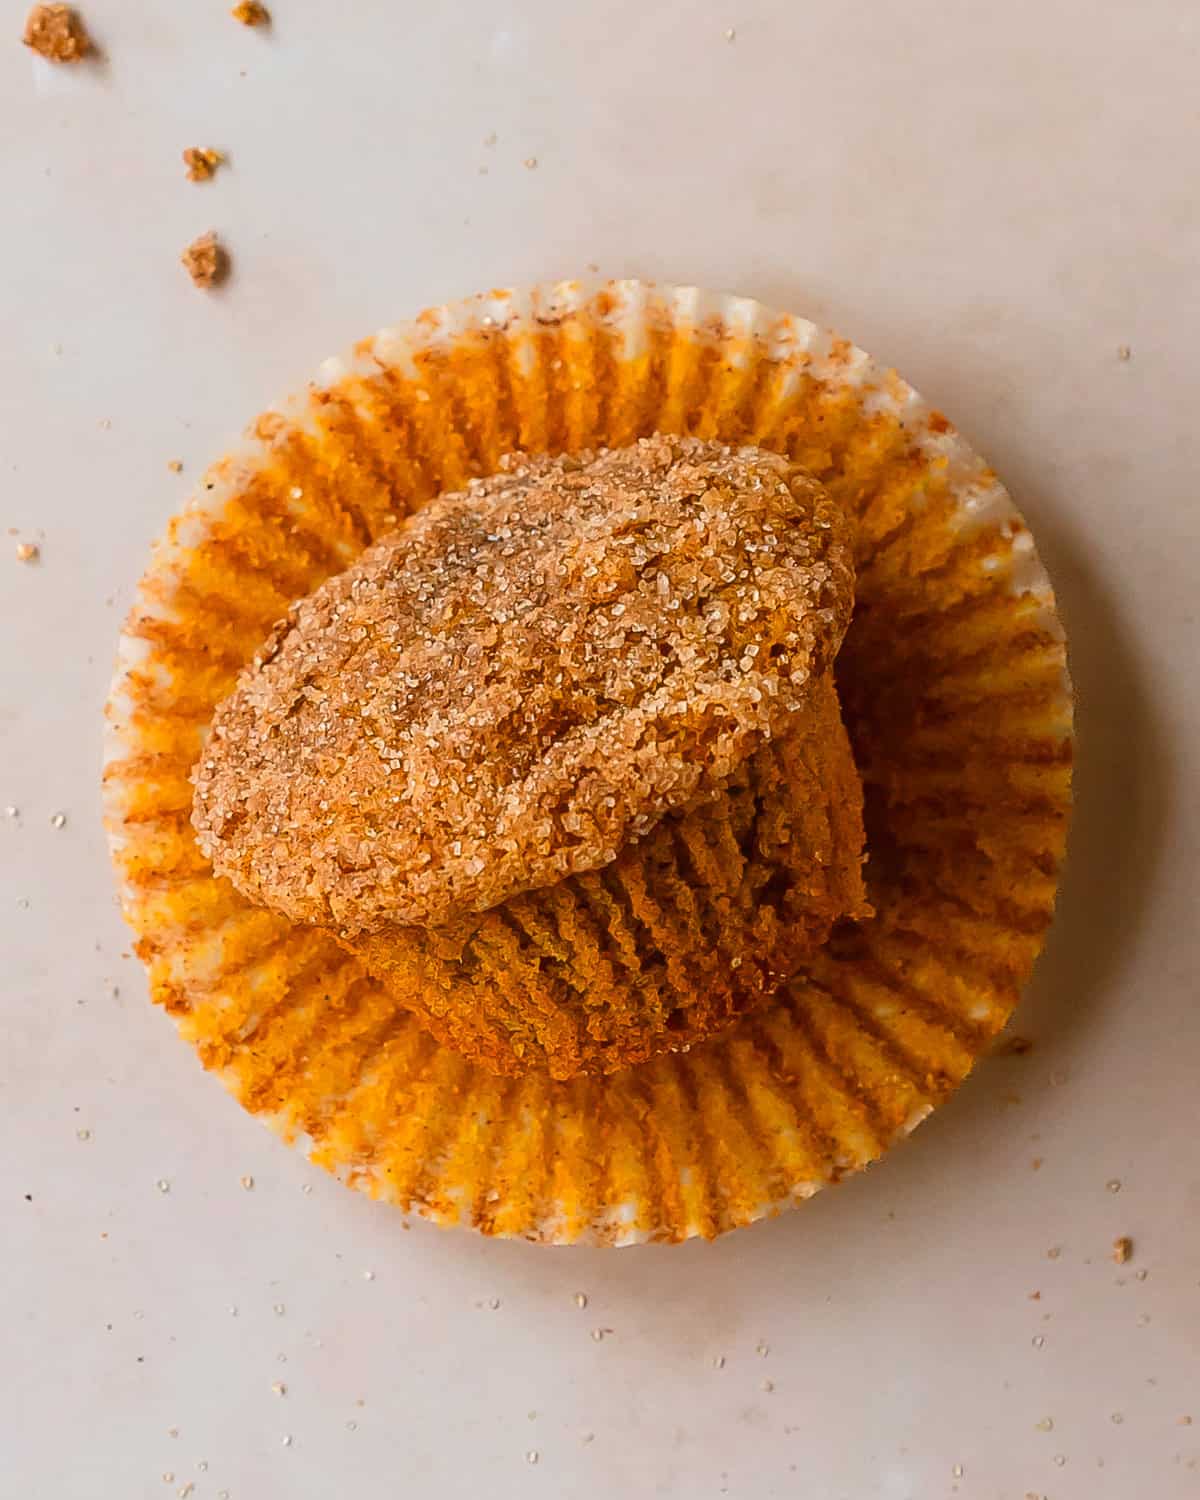  Pumpkin banana muffins are a deliciously soft, moist and fluffy cross between pumpkin bread and banana bread. These banana pumpkin muffins are topped with crunchy cinnamon sugar, giving them the perfect contrast of texture and flavors.  They make the perfect fall breakfast treat. 